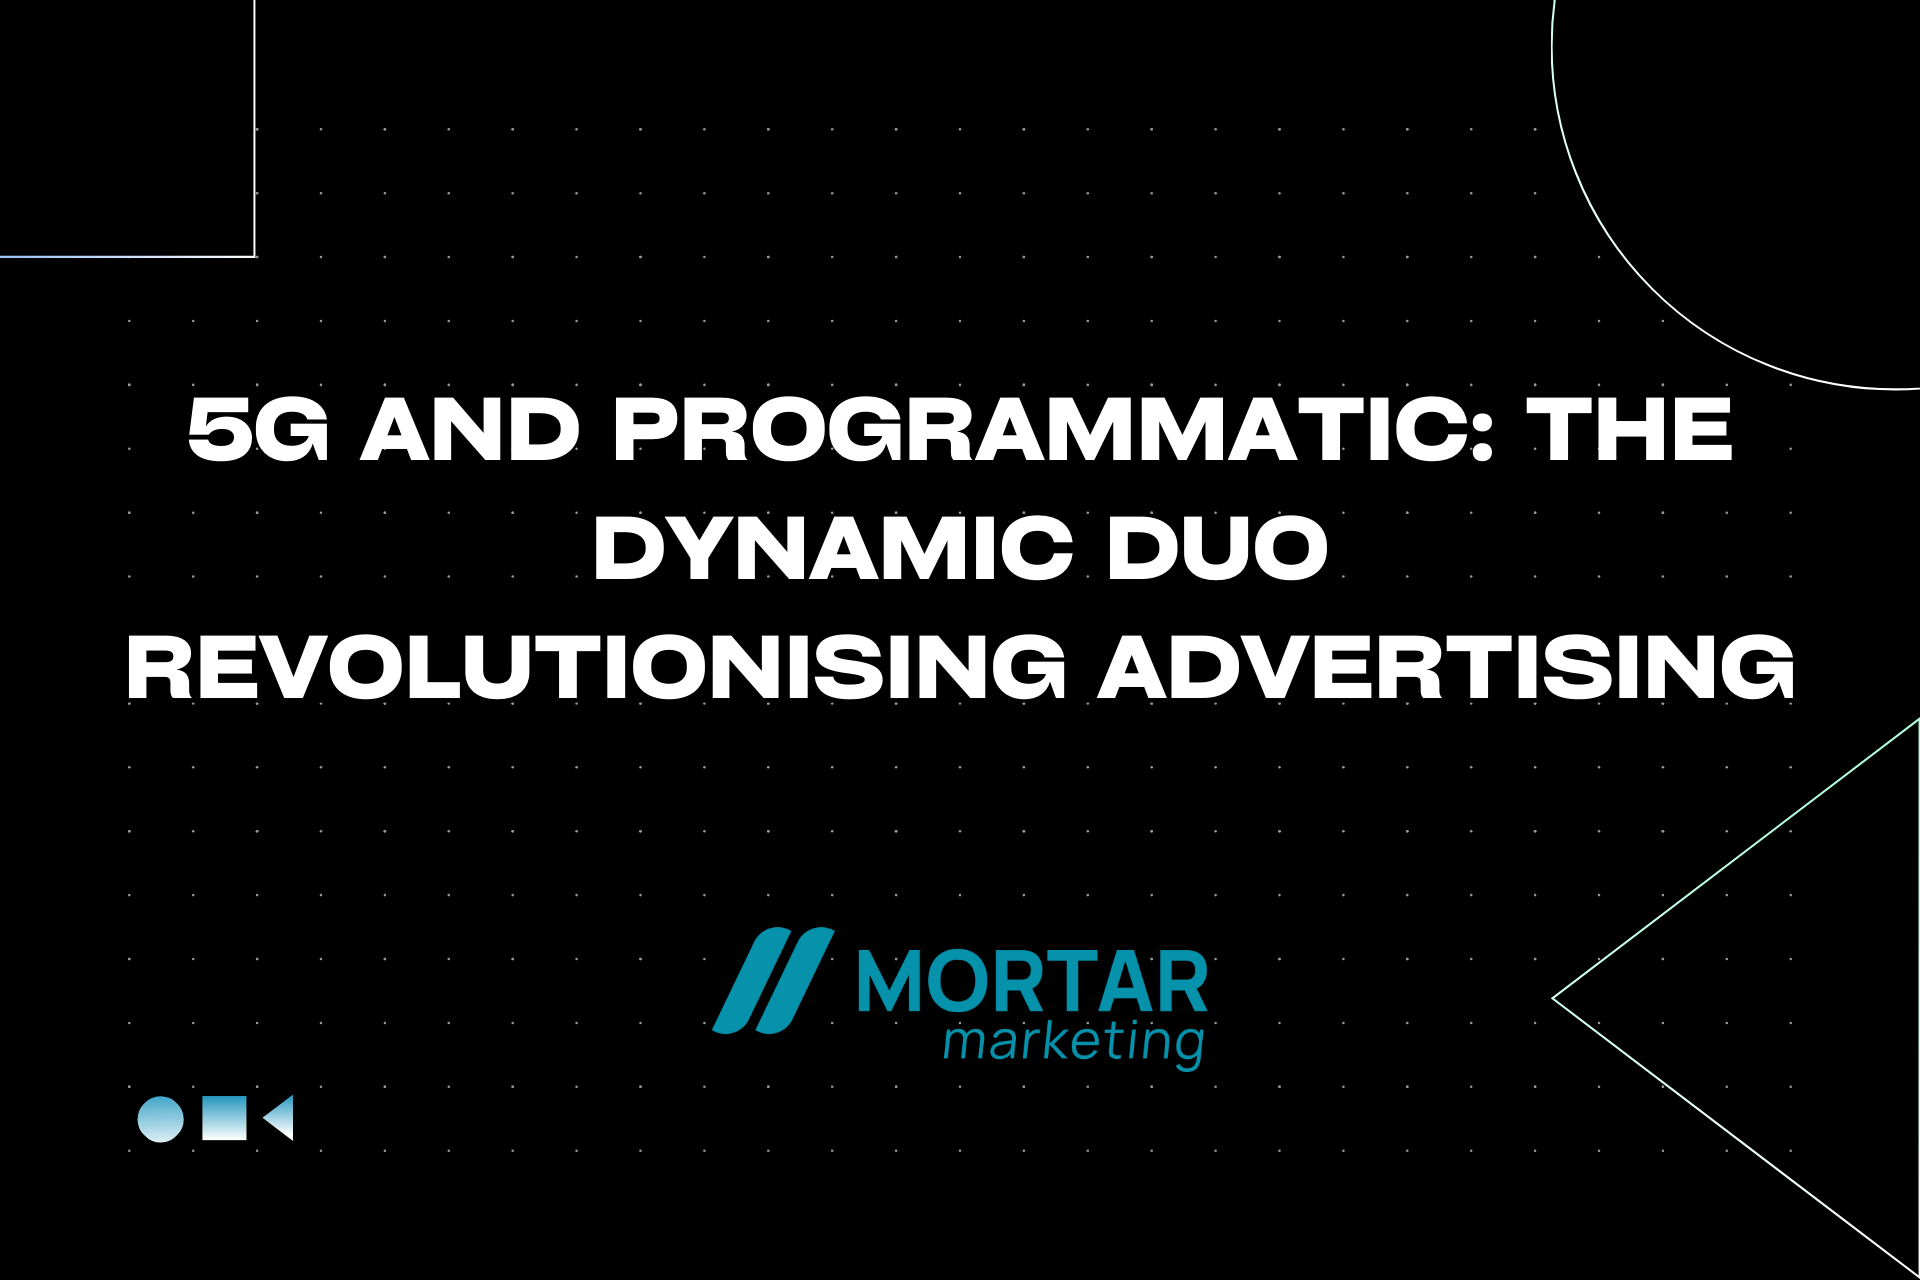 5G and Programmatic: The Dynamic Duo Revolutionising Advertising